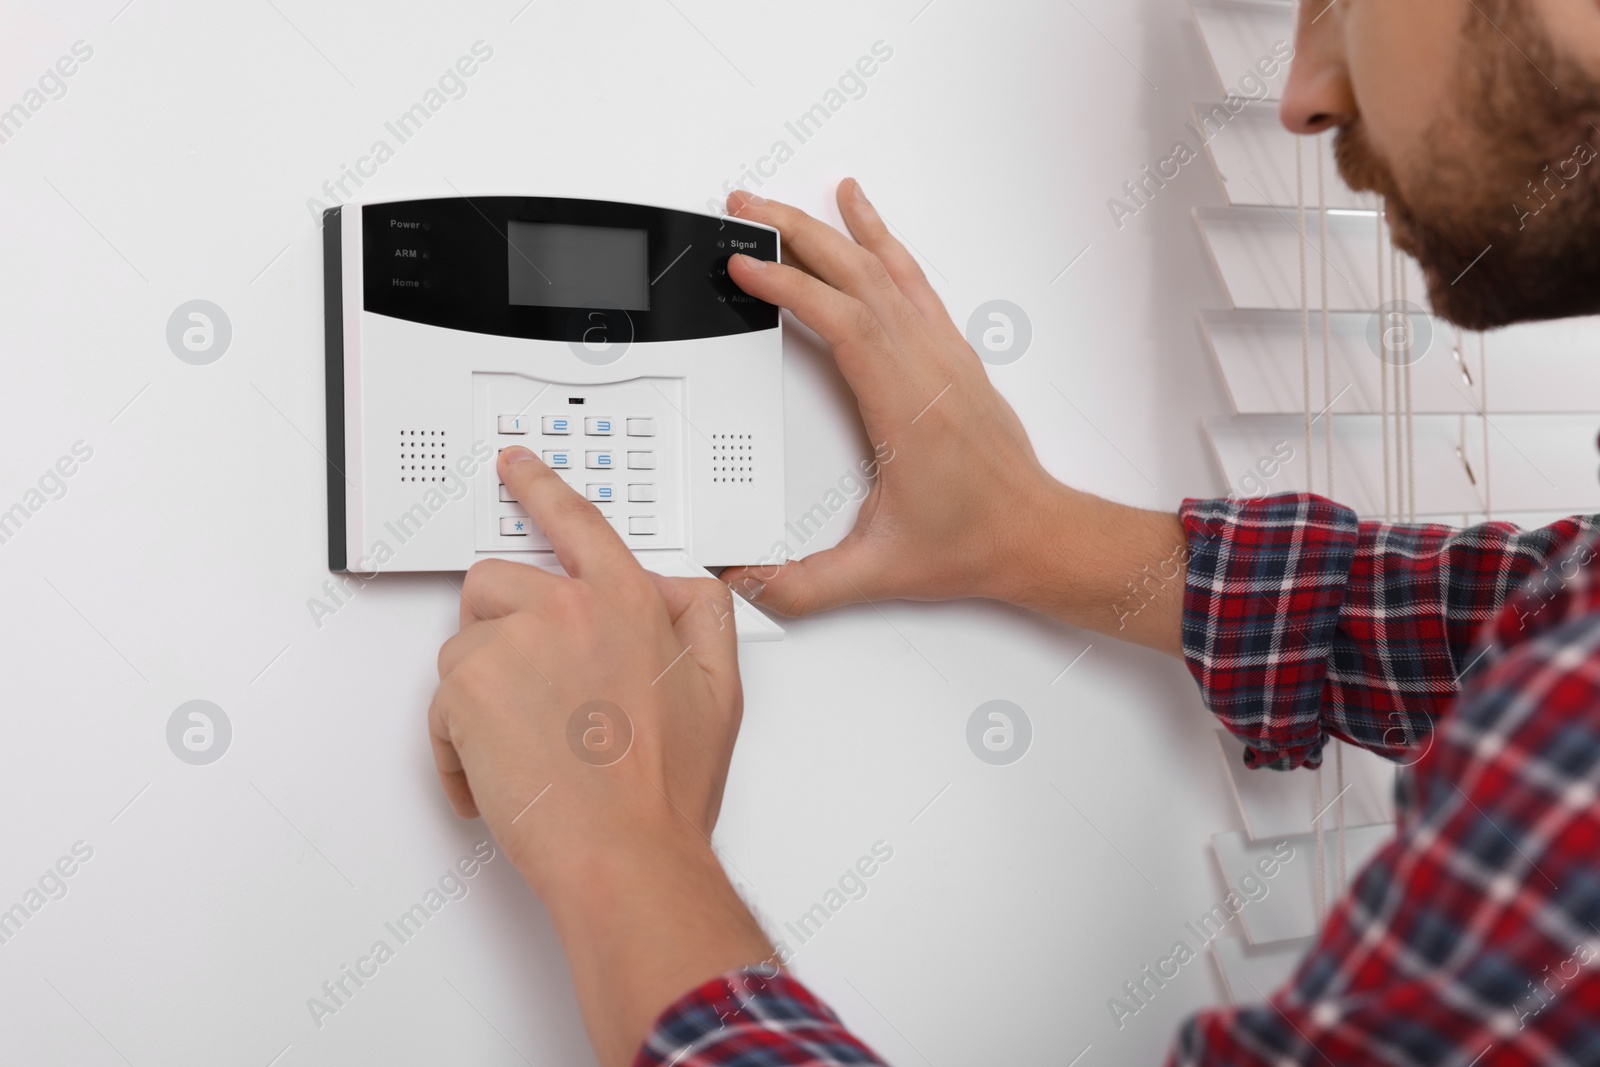 Photo of Man entering code on security alarm system at home, closeup